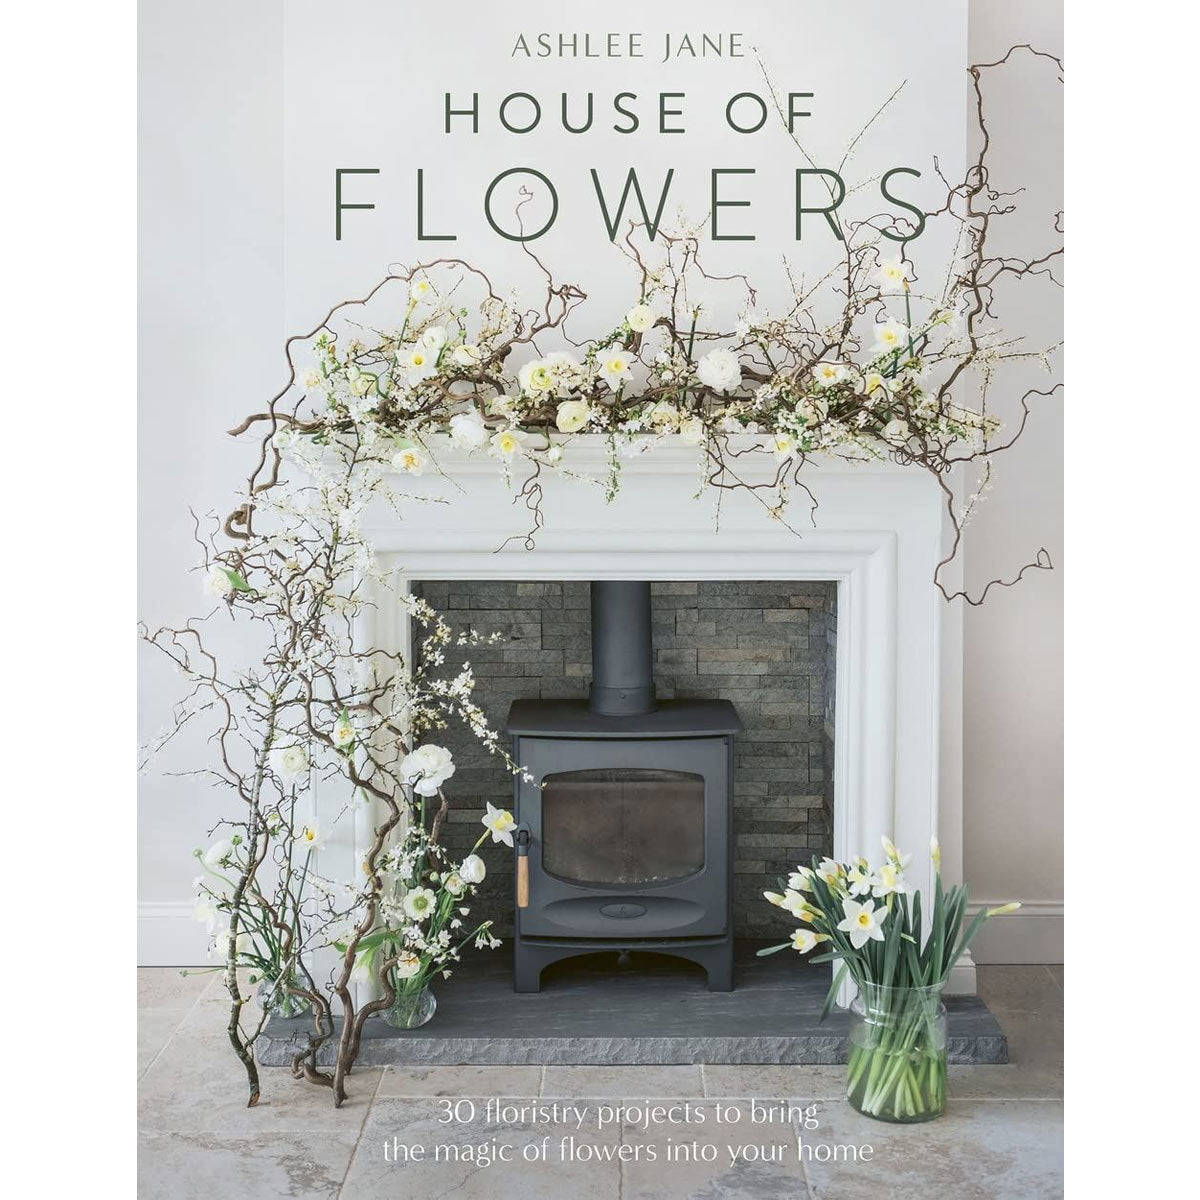 House of Flowers by Ashlee Jane